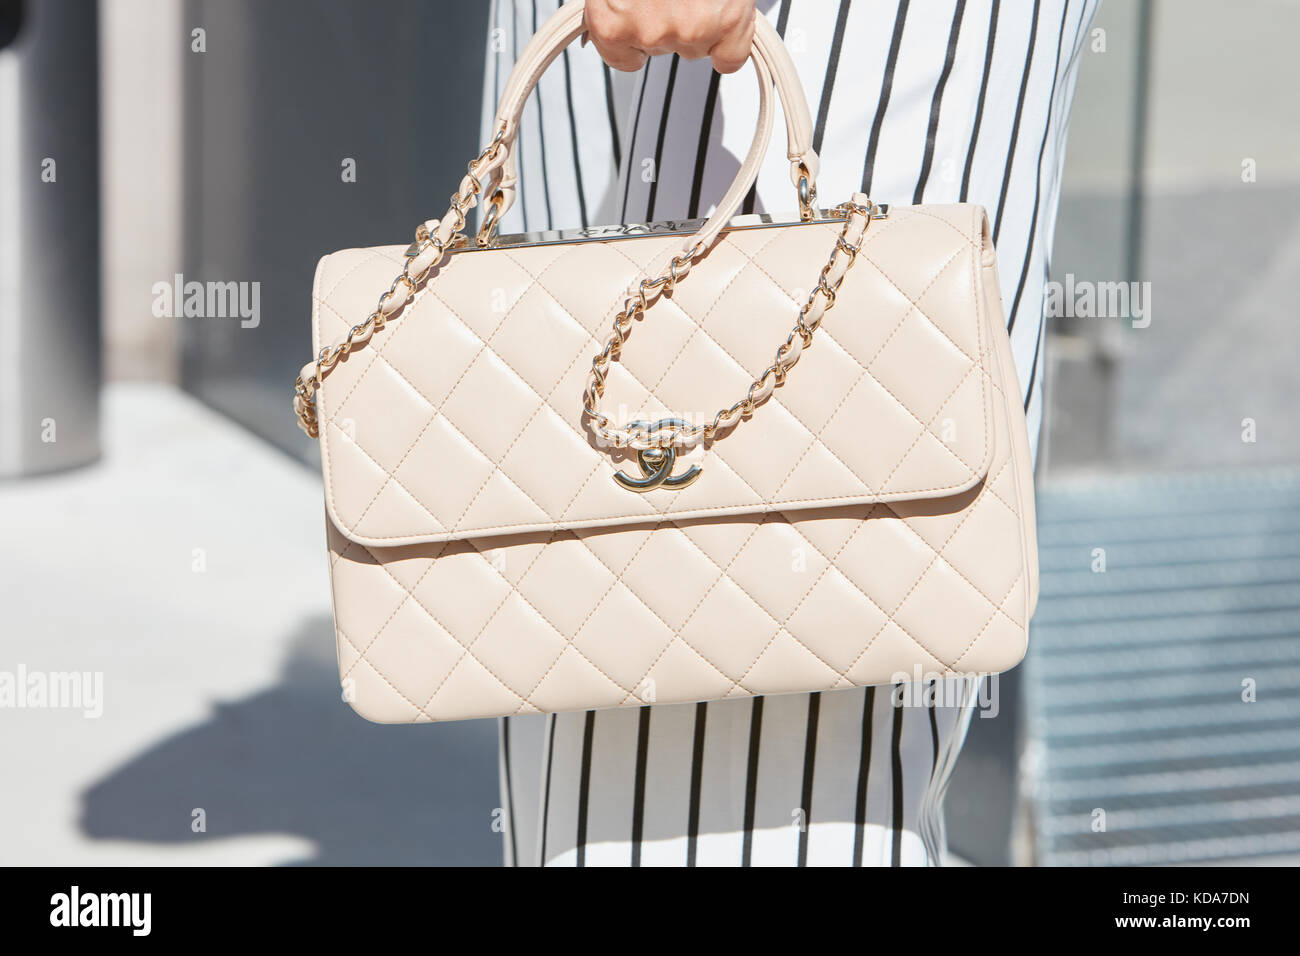 MILAN - SEPTEMBER 20: Woman with pale pink Chanel leather bag and